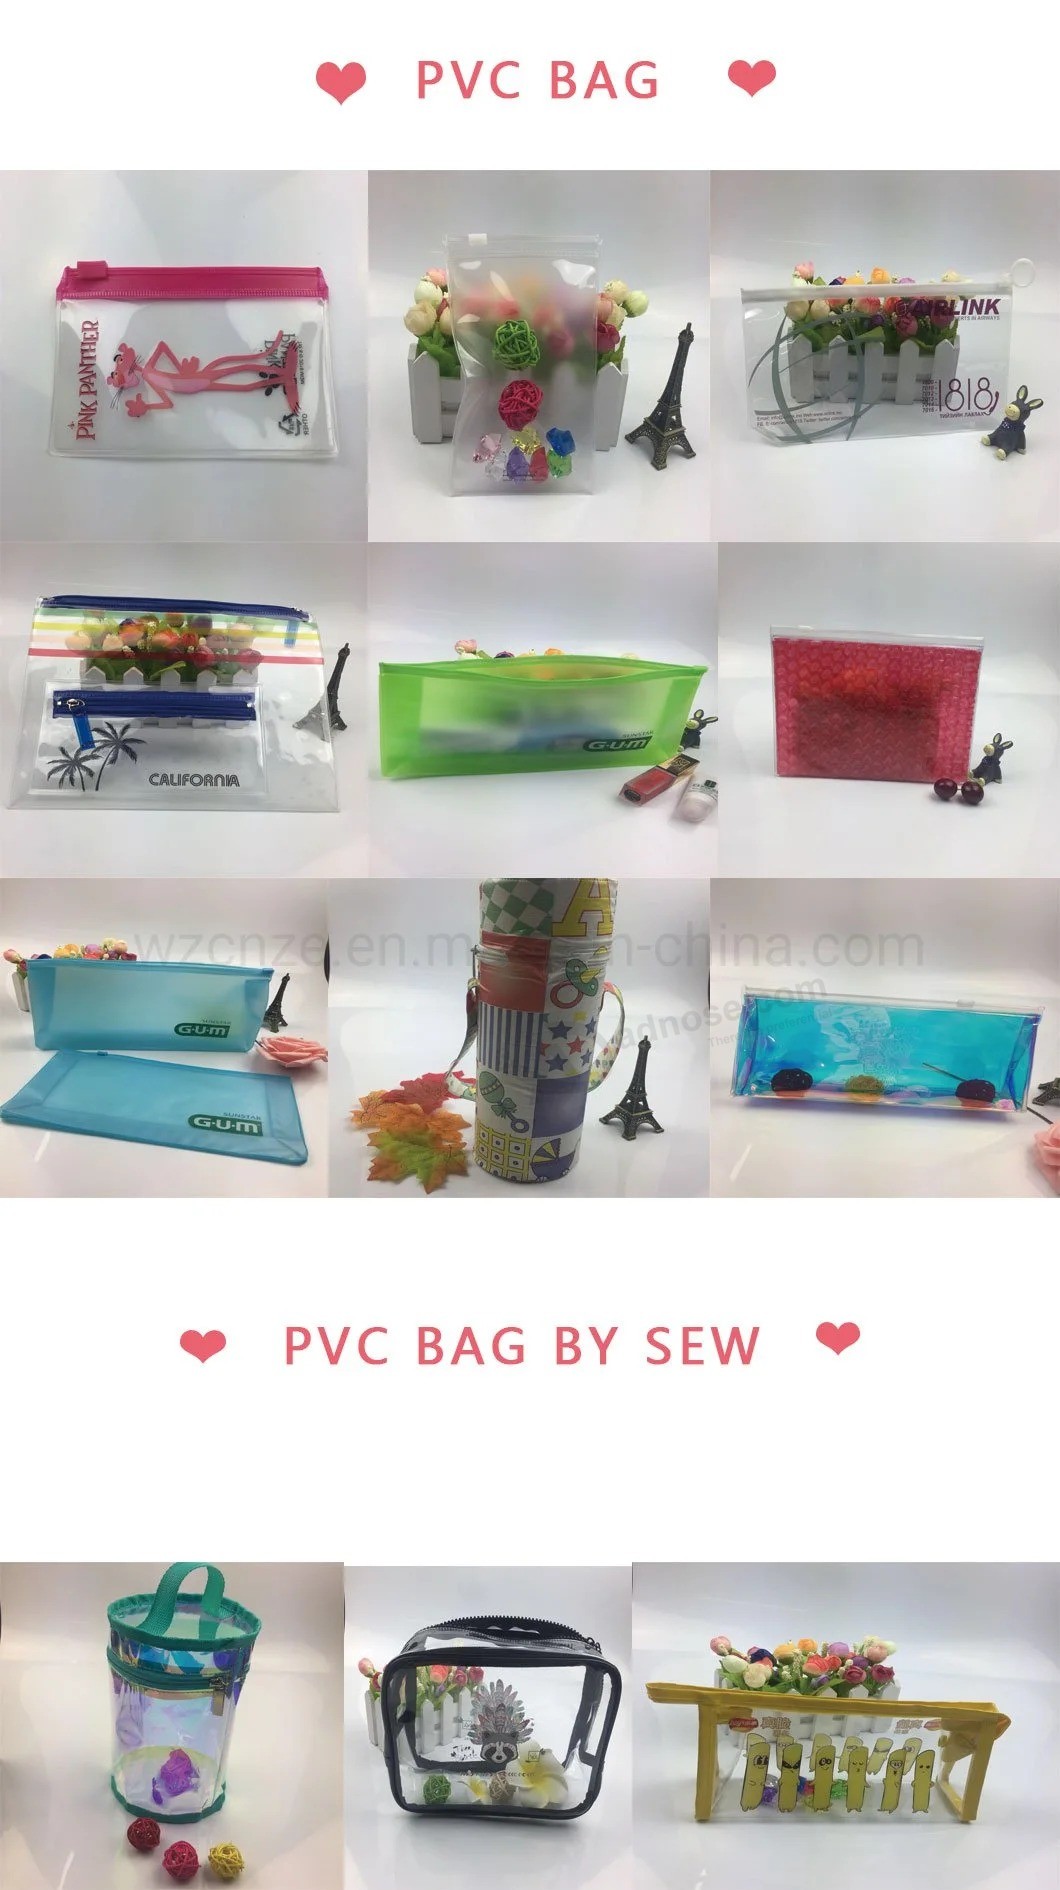 Custom Travel Luggage Pouch Custom Clear Transparent PVC Travel Bag Make up Cosmetic Bag